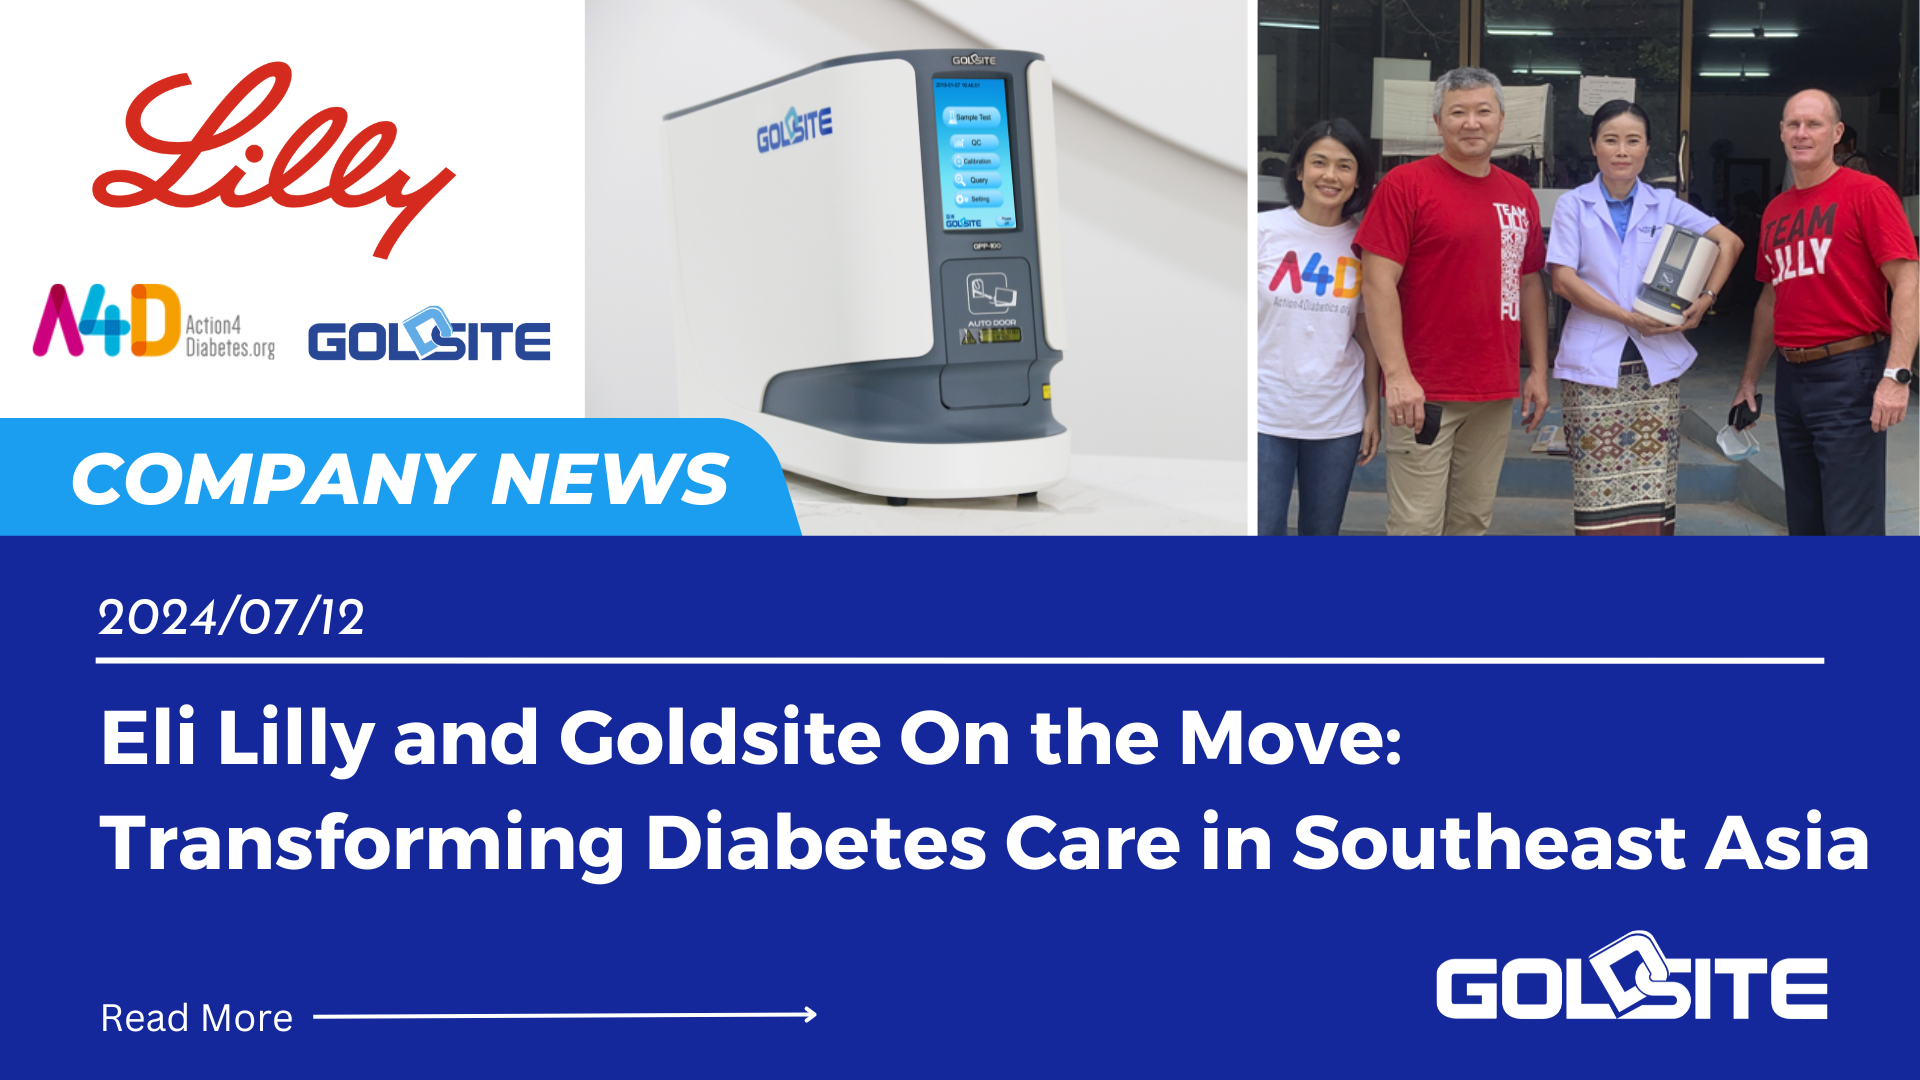 Eli Lilly and Goldsite on the Move: Transforming Diabetes Care in Southeast Asia